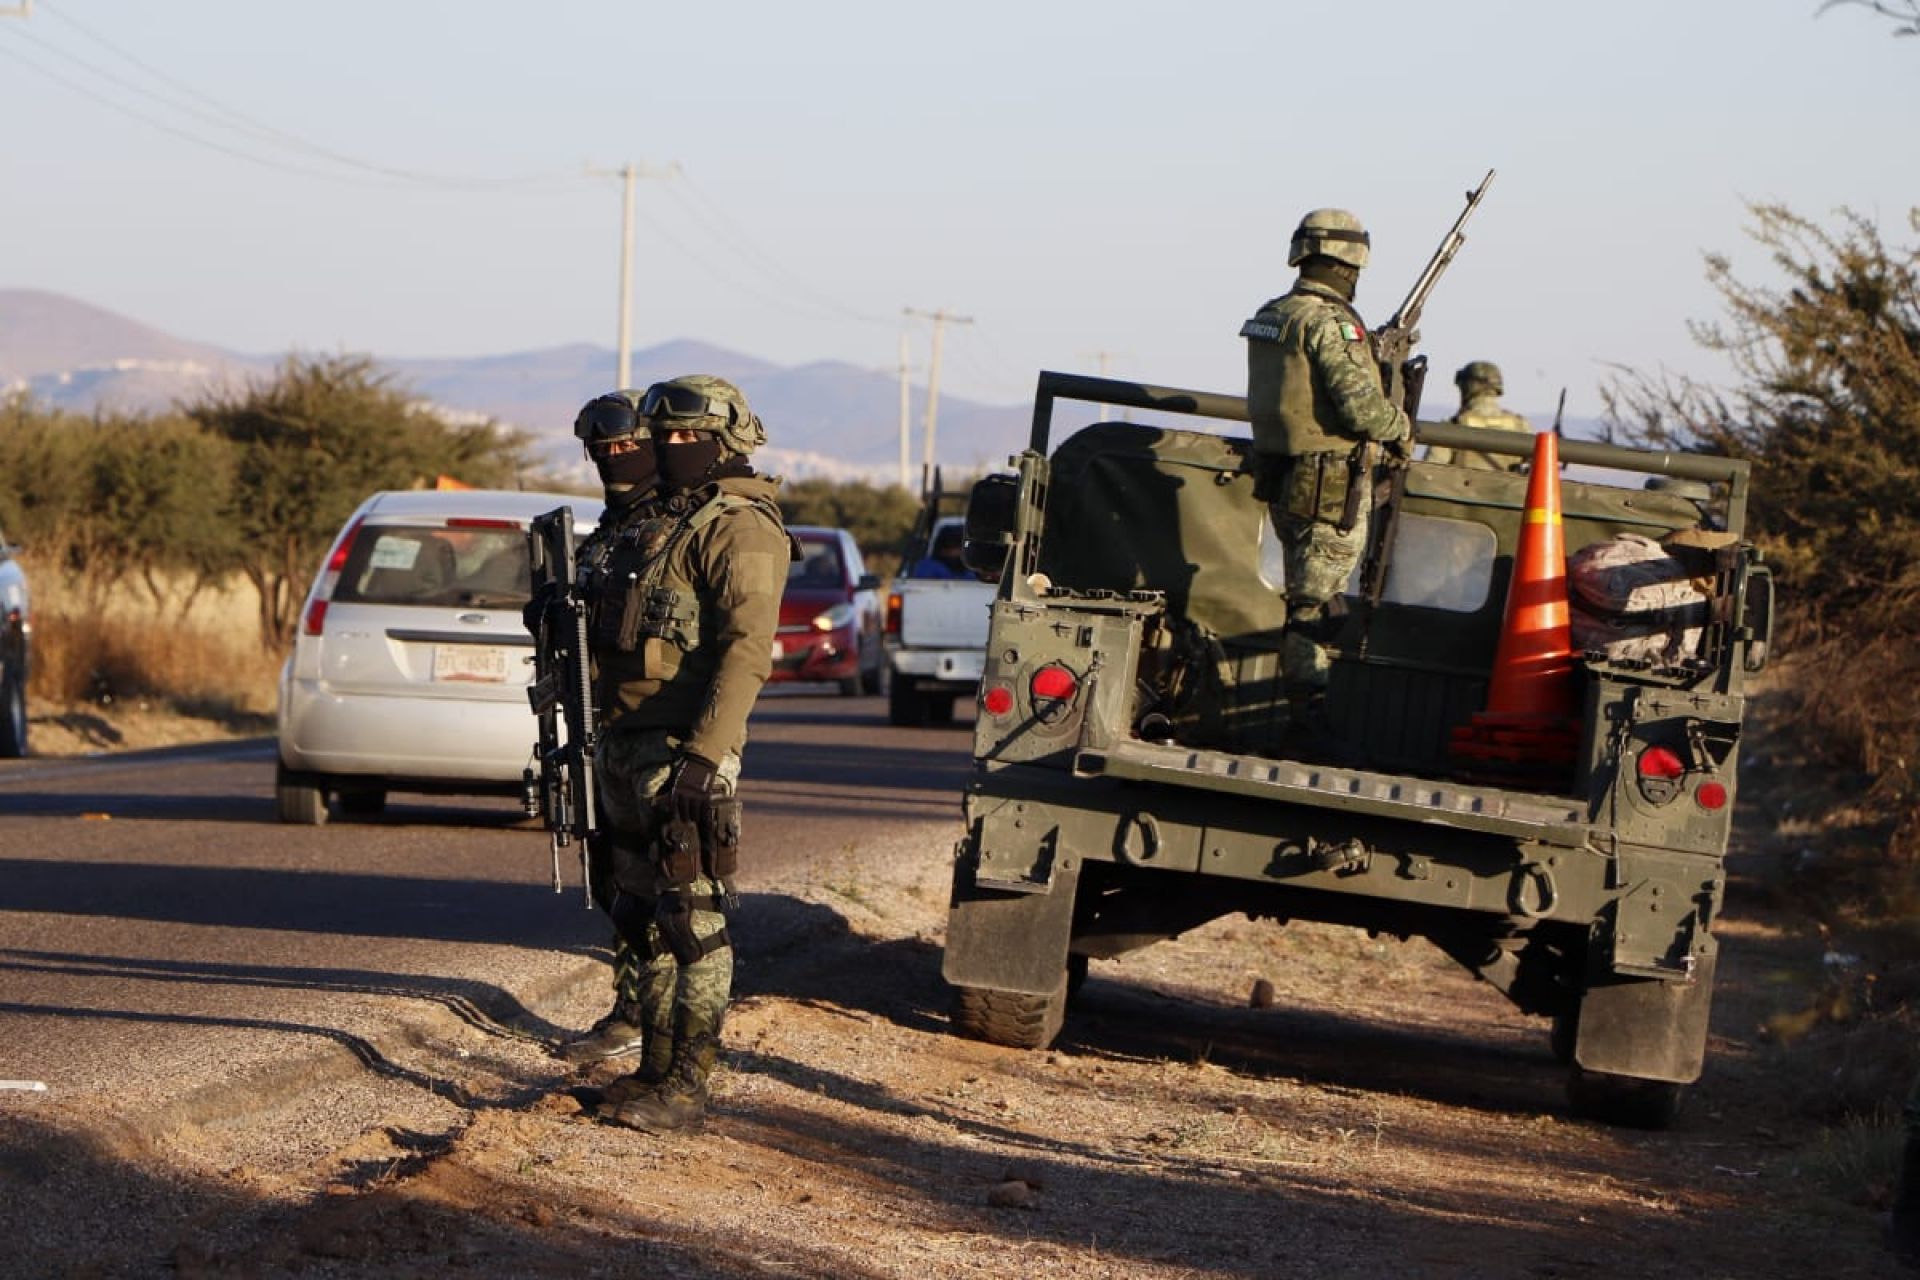 Two bodies found on San Jerónimo road, in Zacatecas